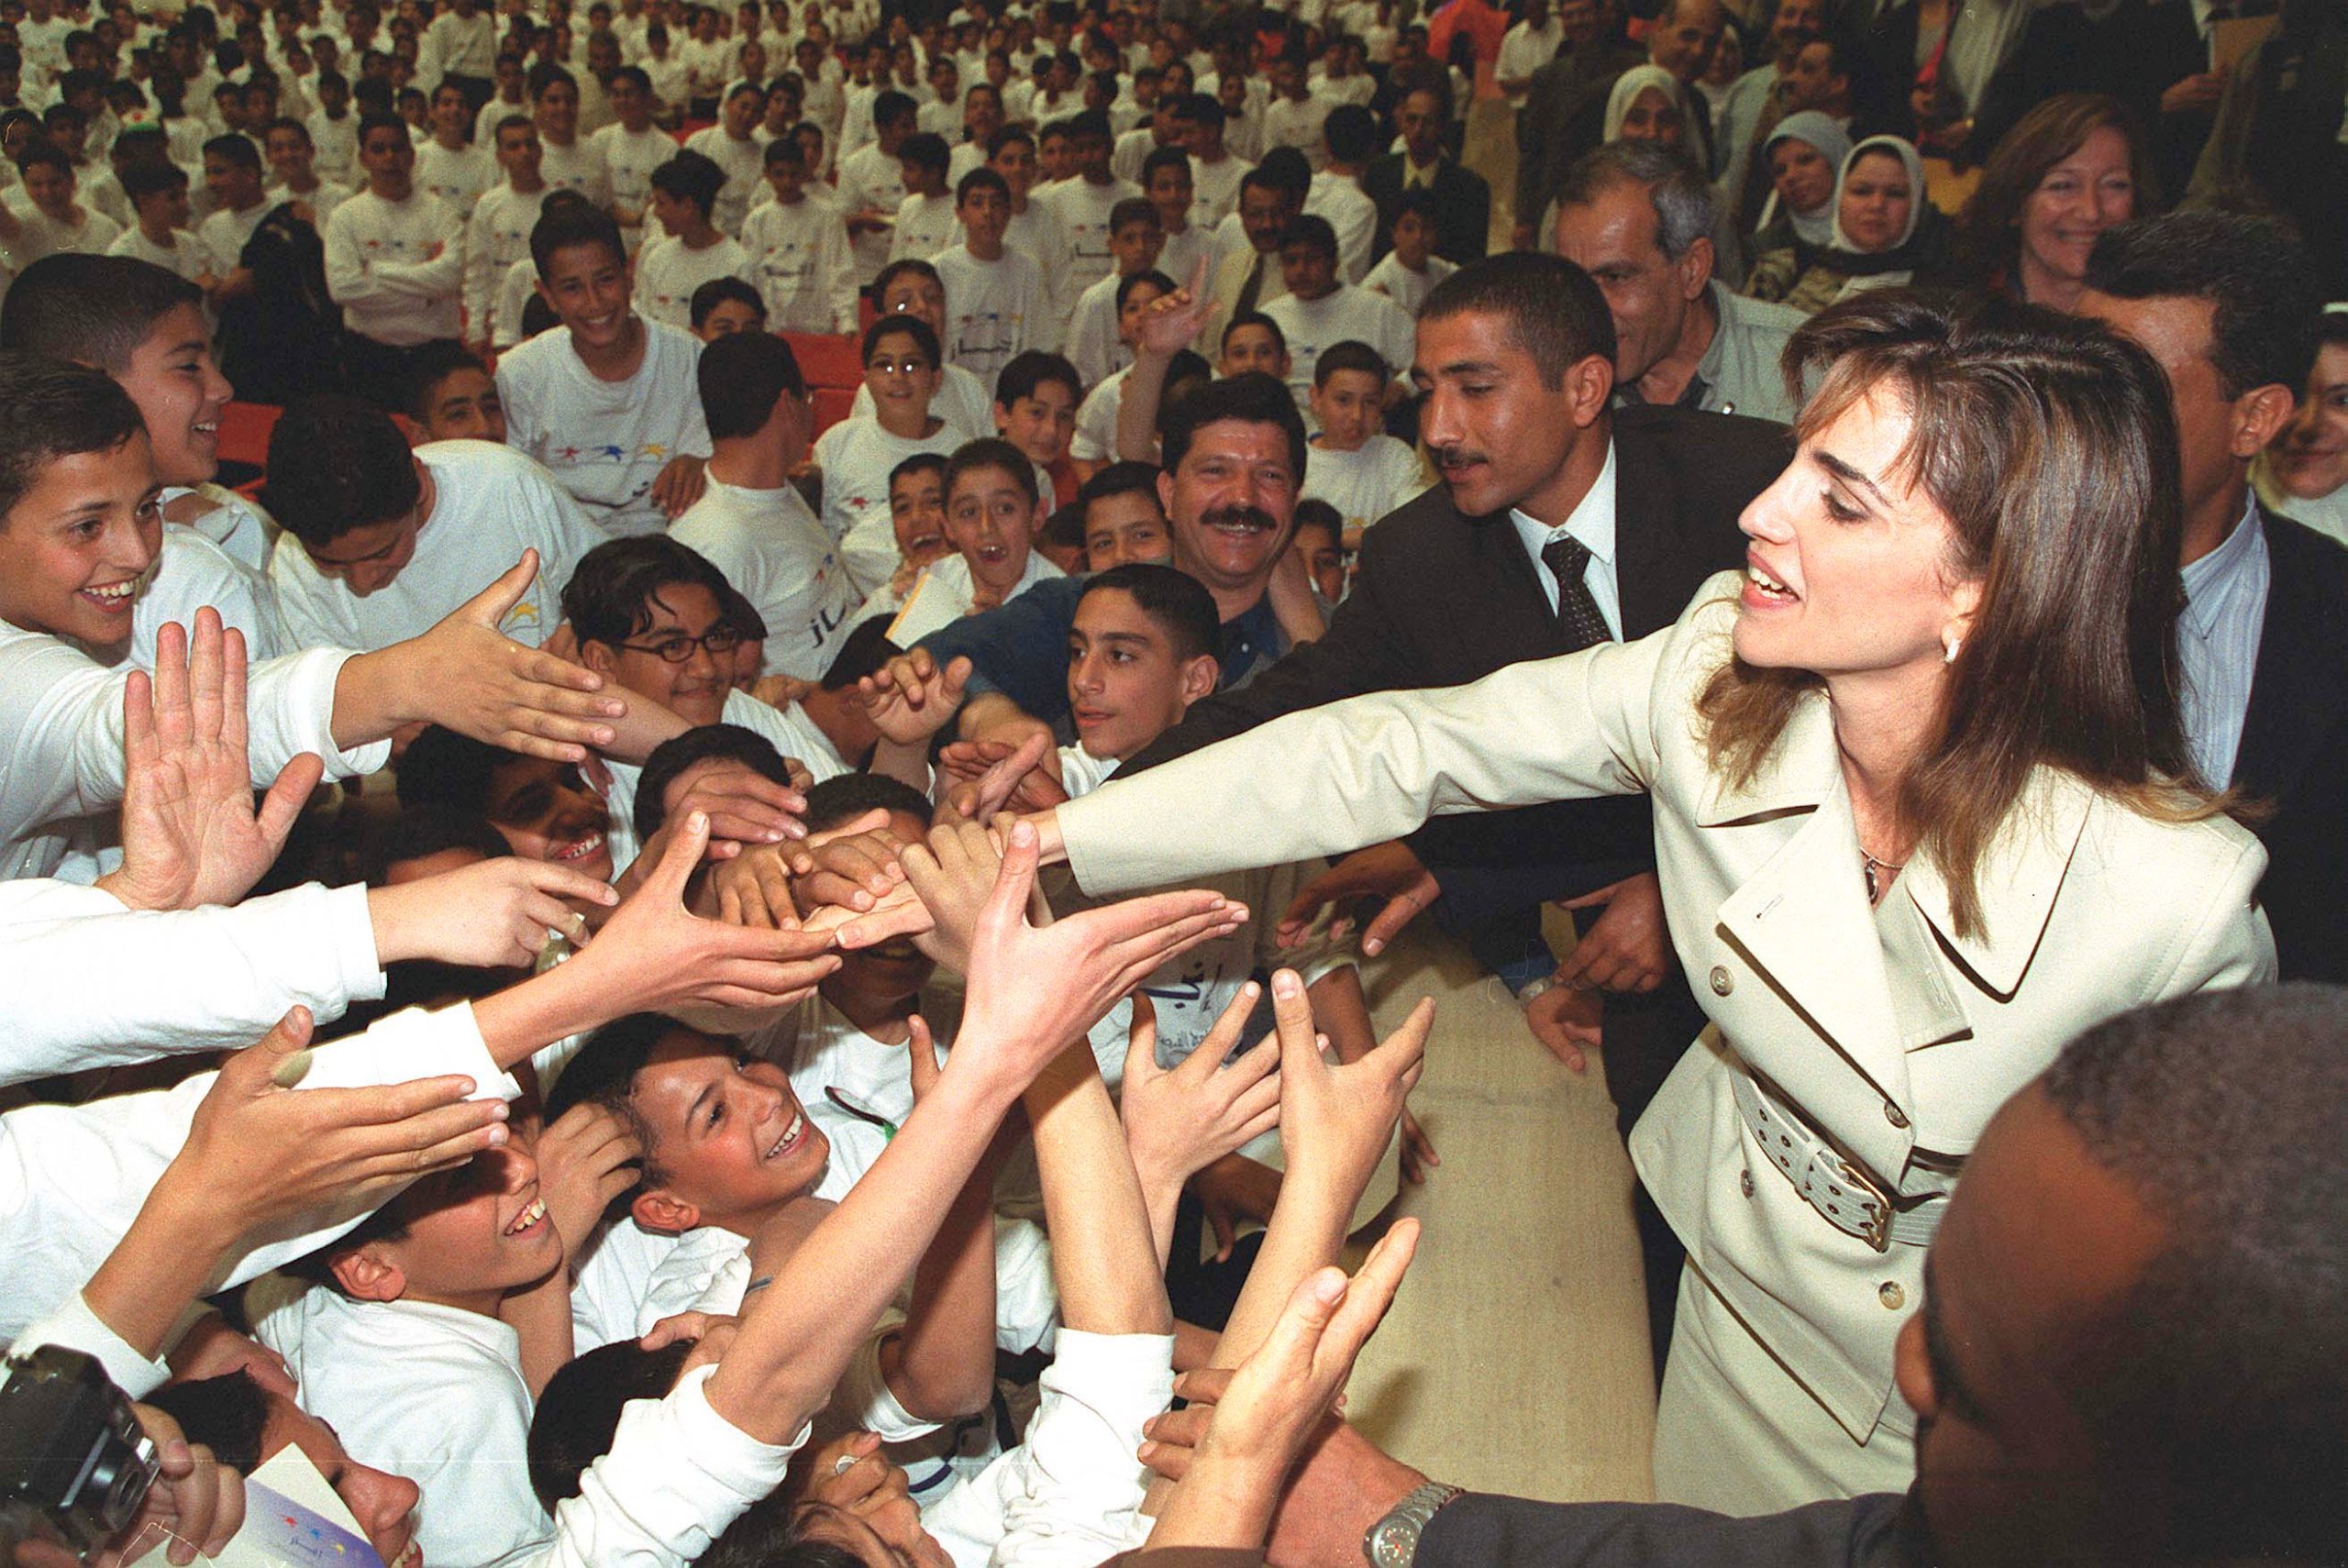 Queen Rania Reaches Out to Kids